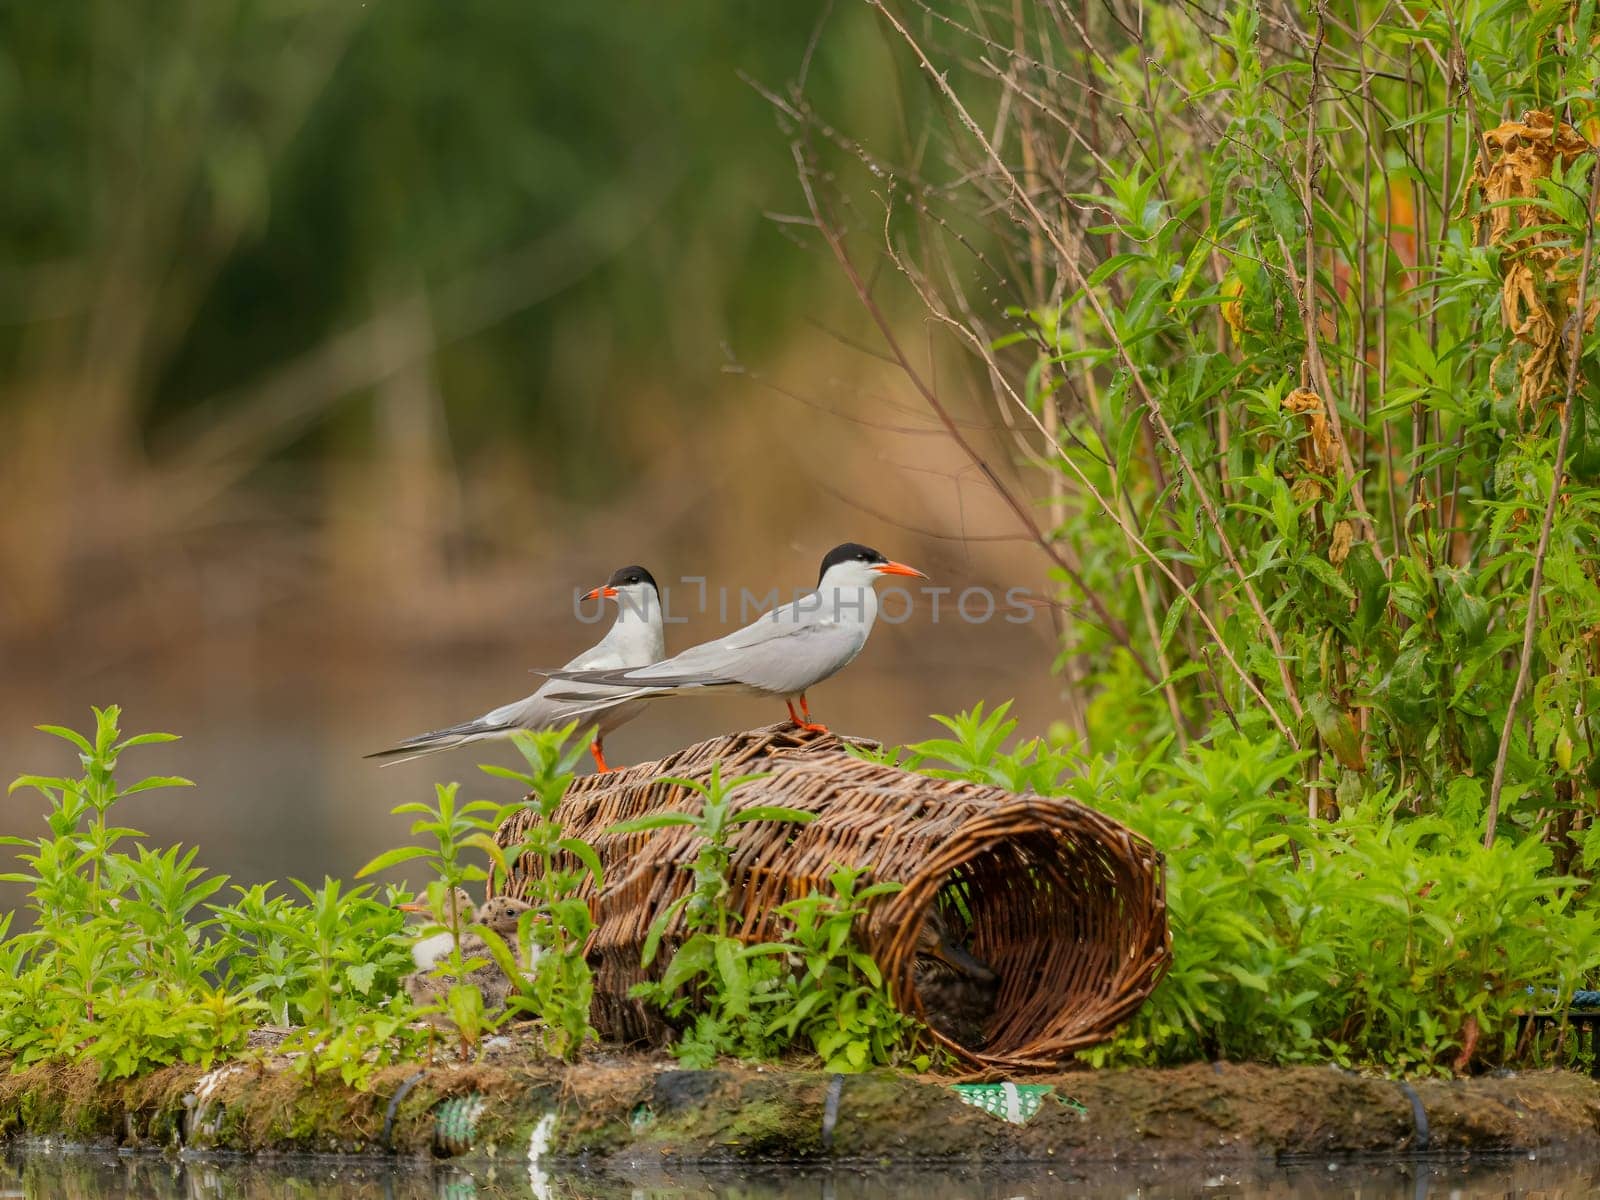 Common Terns nurturing their young on the breeding ground, a beautiful scene of parental care and protection.